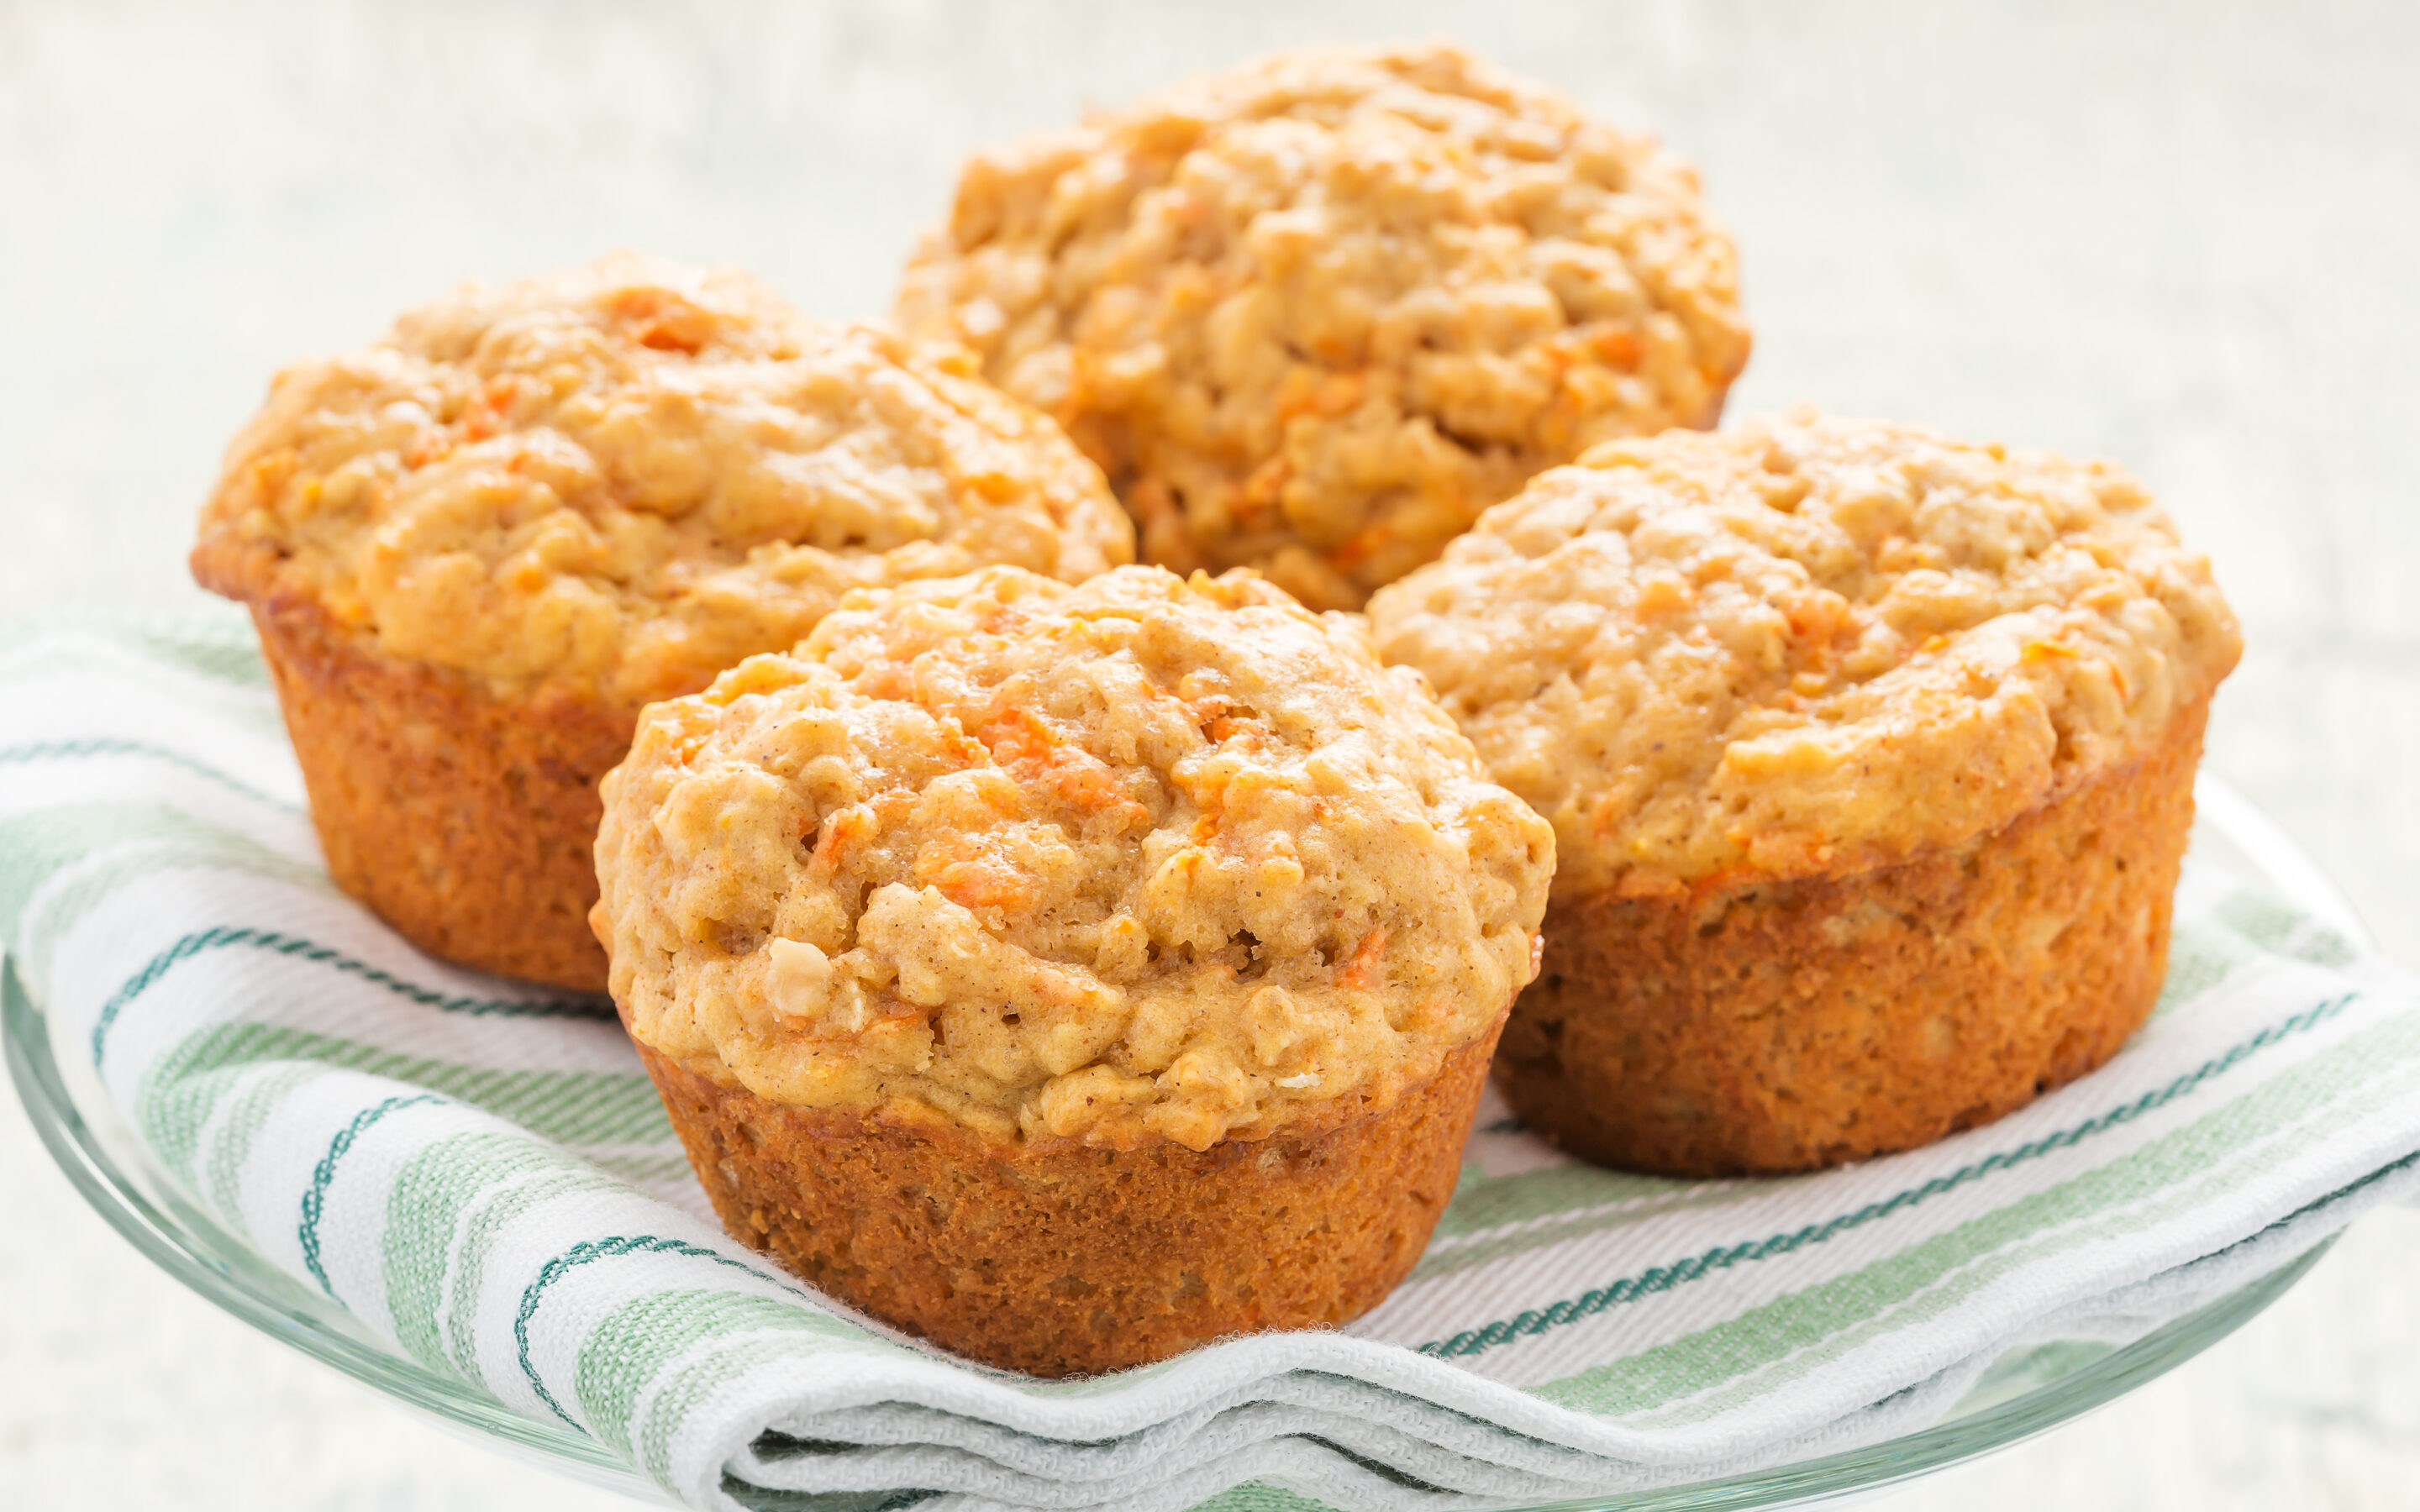 Morning Glory Muffins/Carrot Apple Muffins